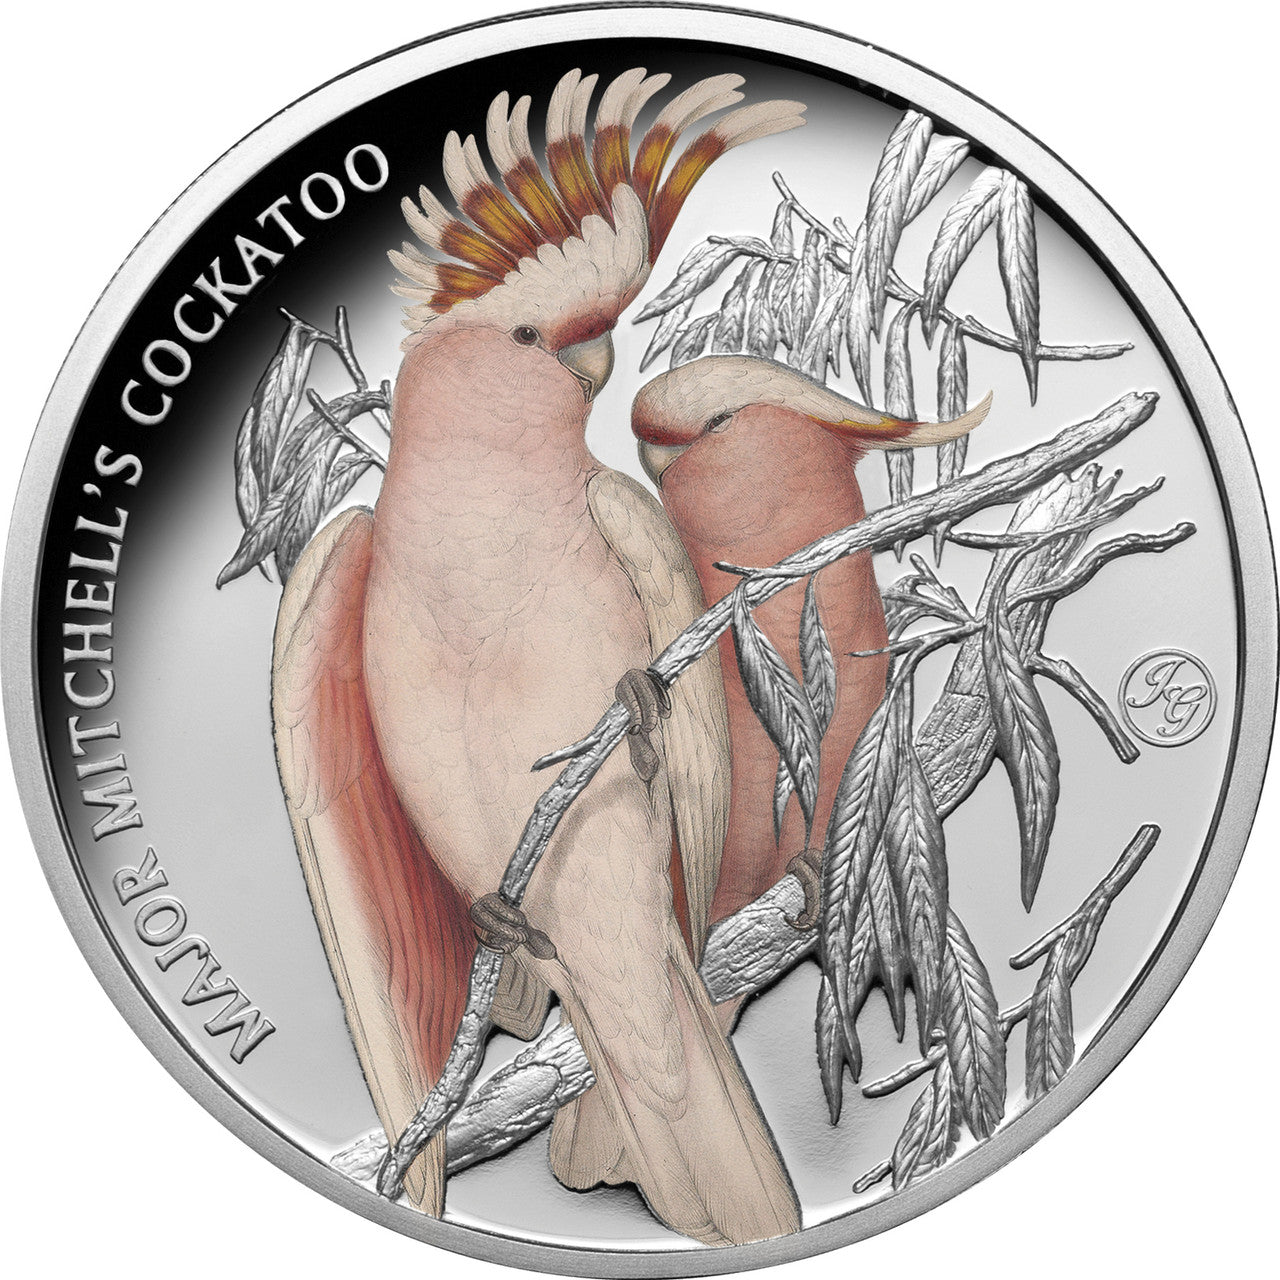 Major Mitchell’s Cockatoo 2023 $1 1oz Silver Proof Coin